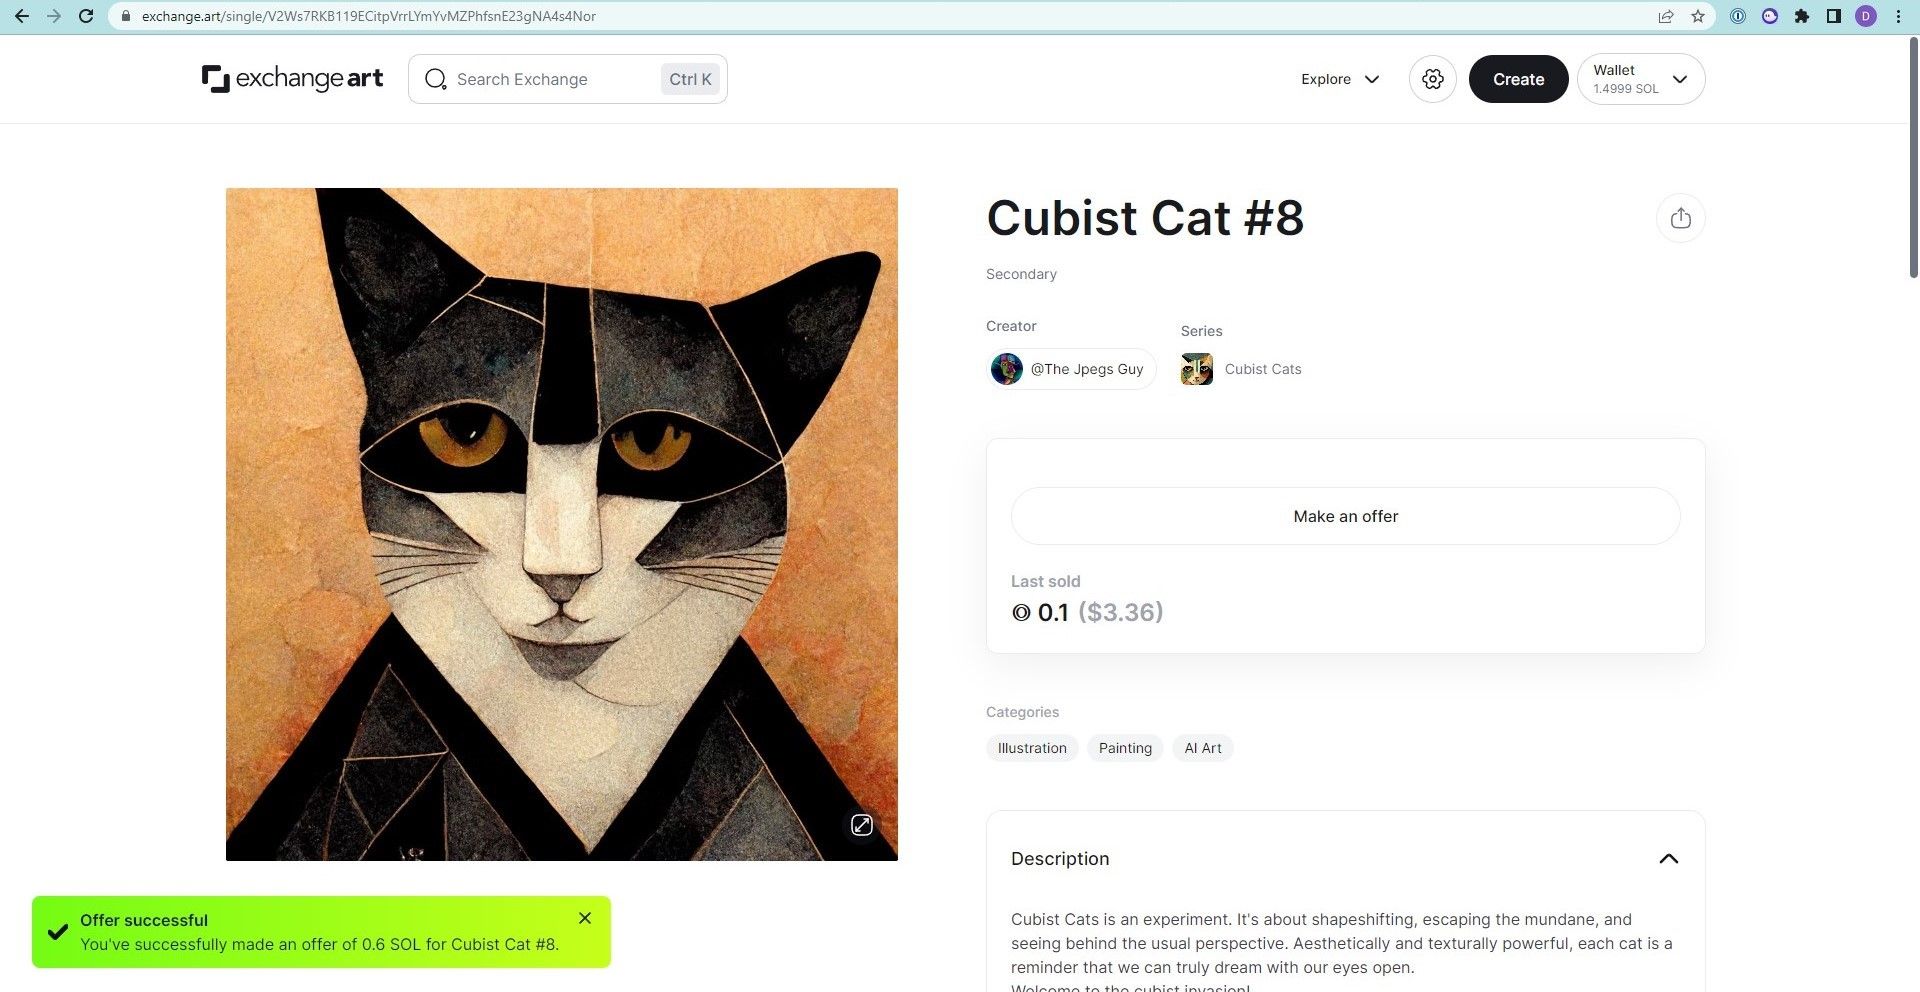 Screenshot from ExchangeArt - with a black and white cat in cubist style. There is a notification that the offer was accepted, but the other information on the page doesn't reflect the notification